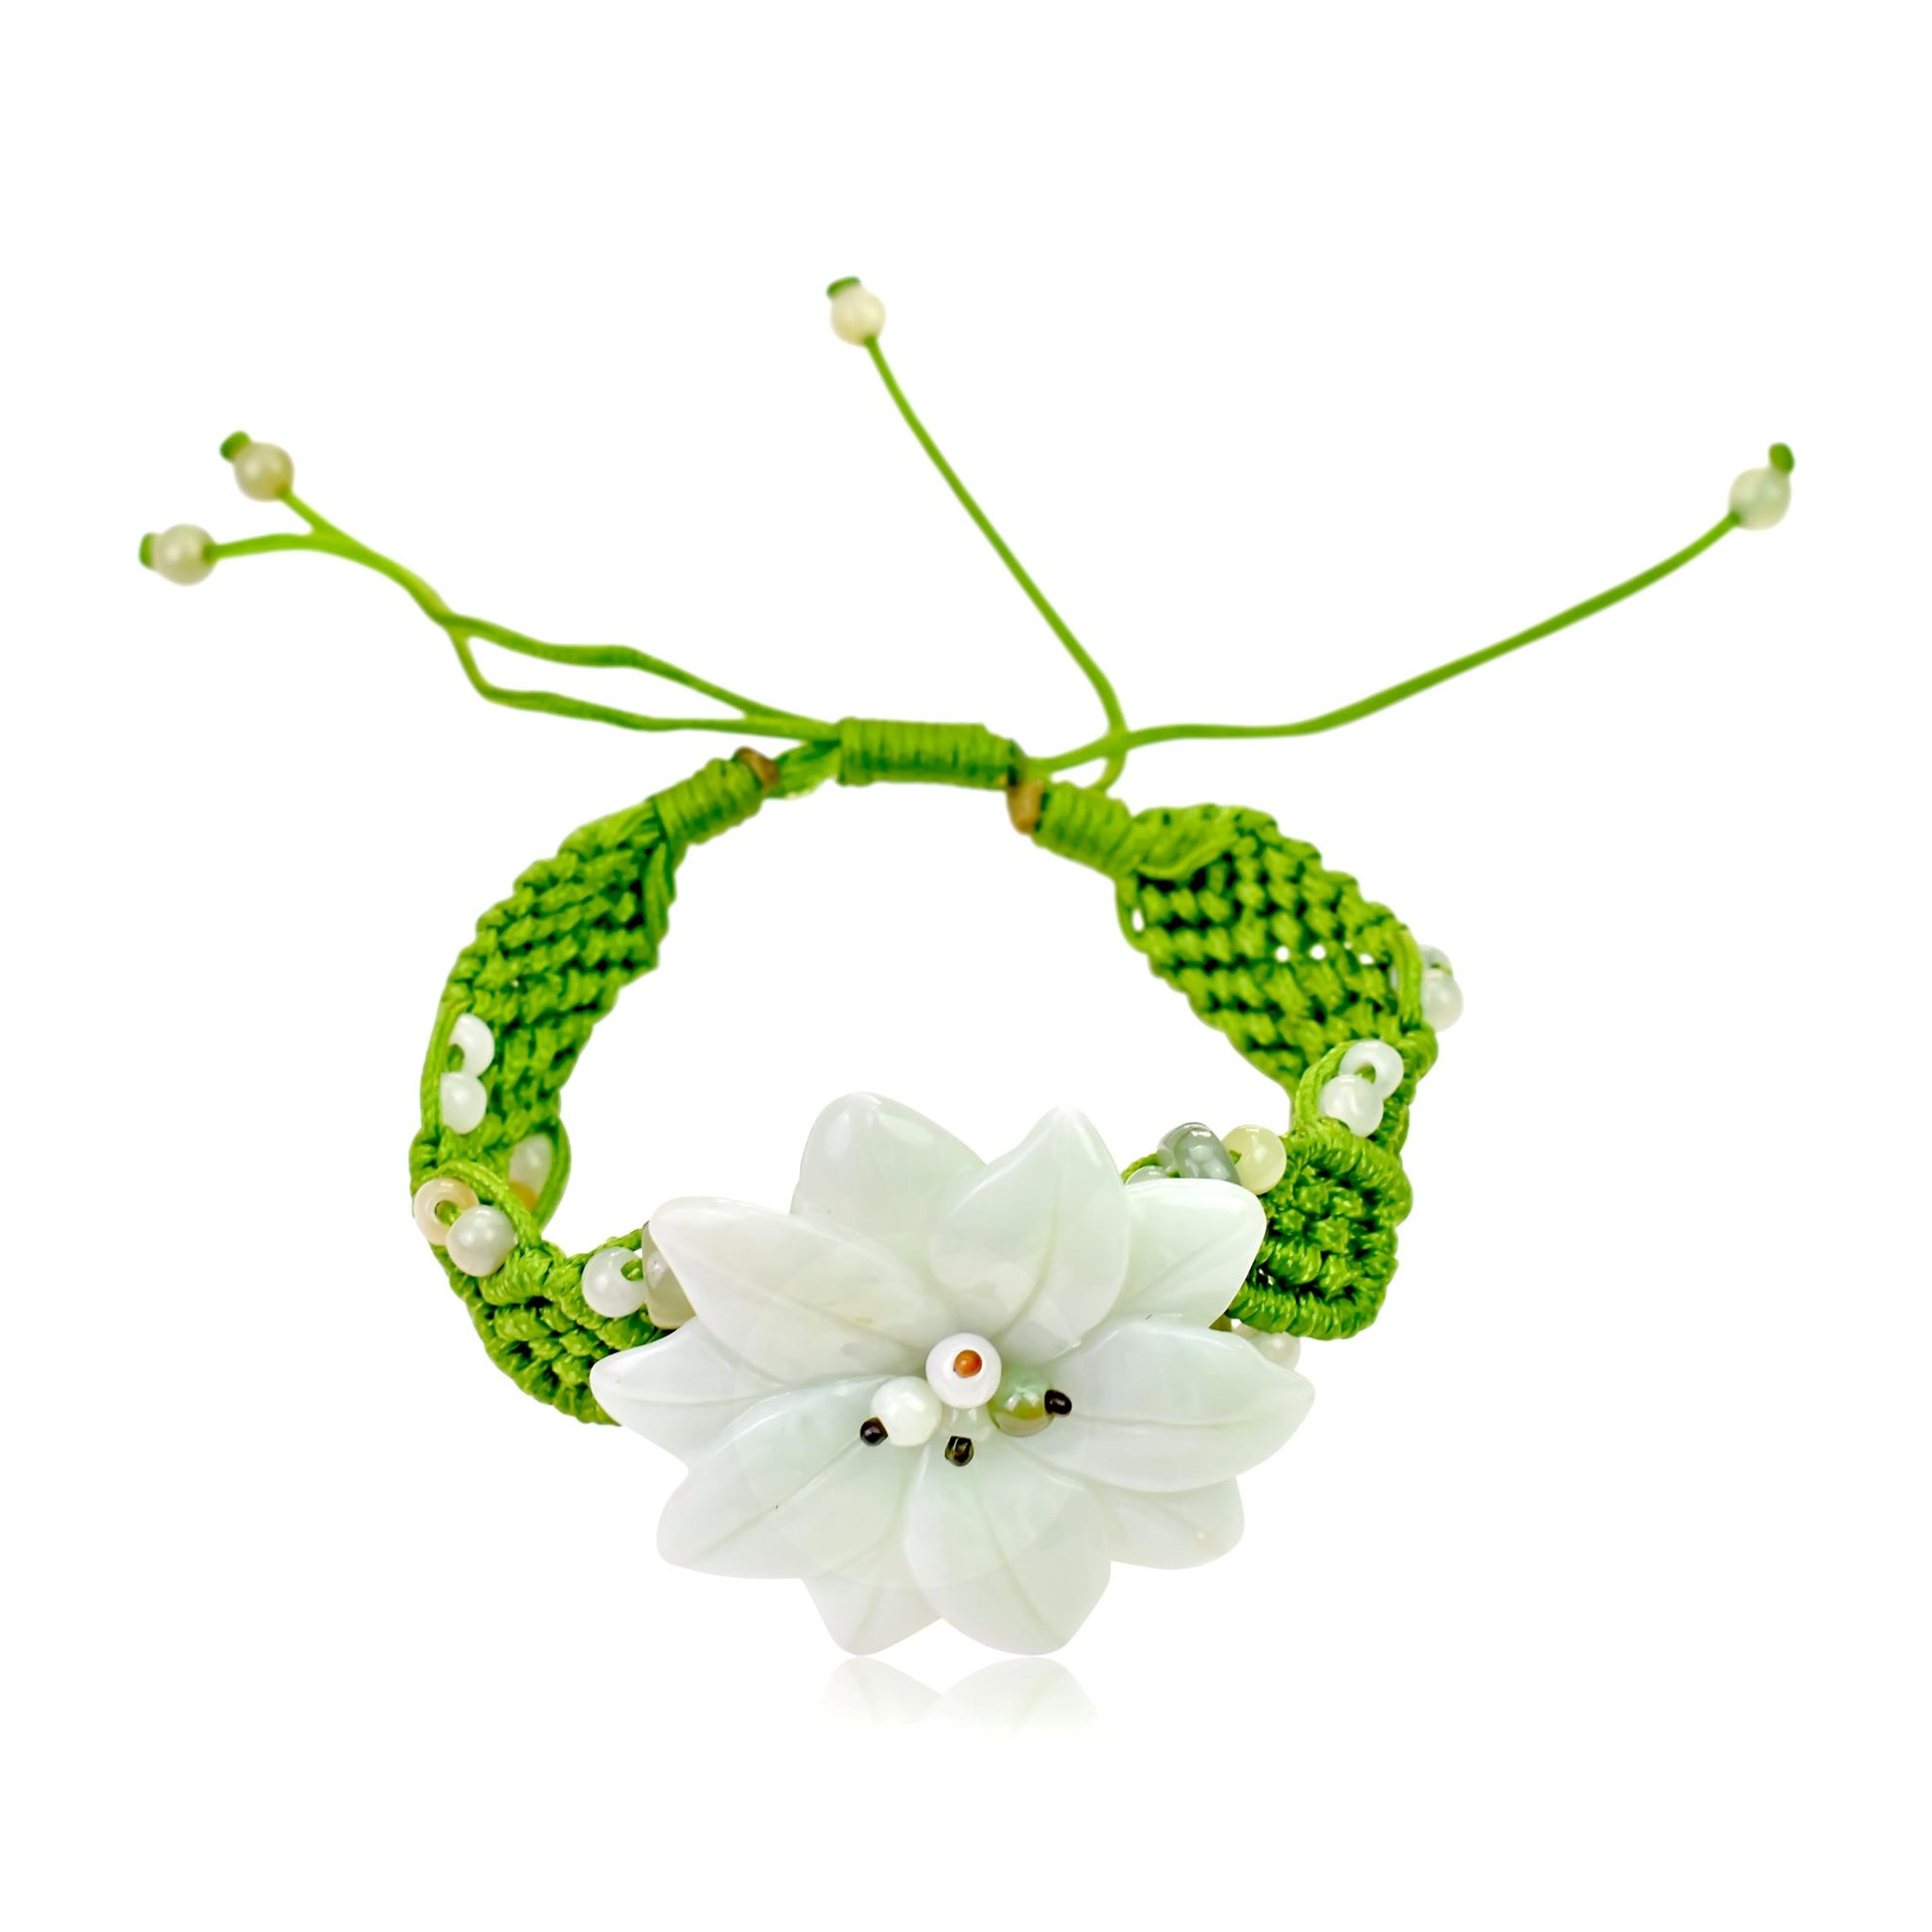 Show your Love of the Sea with Anemone Flower Bracelet made with Lime Cord